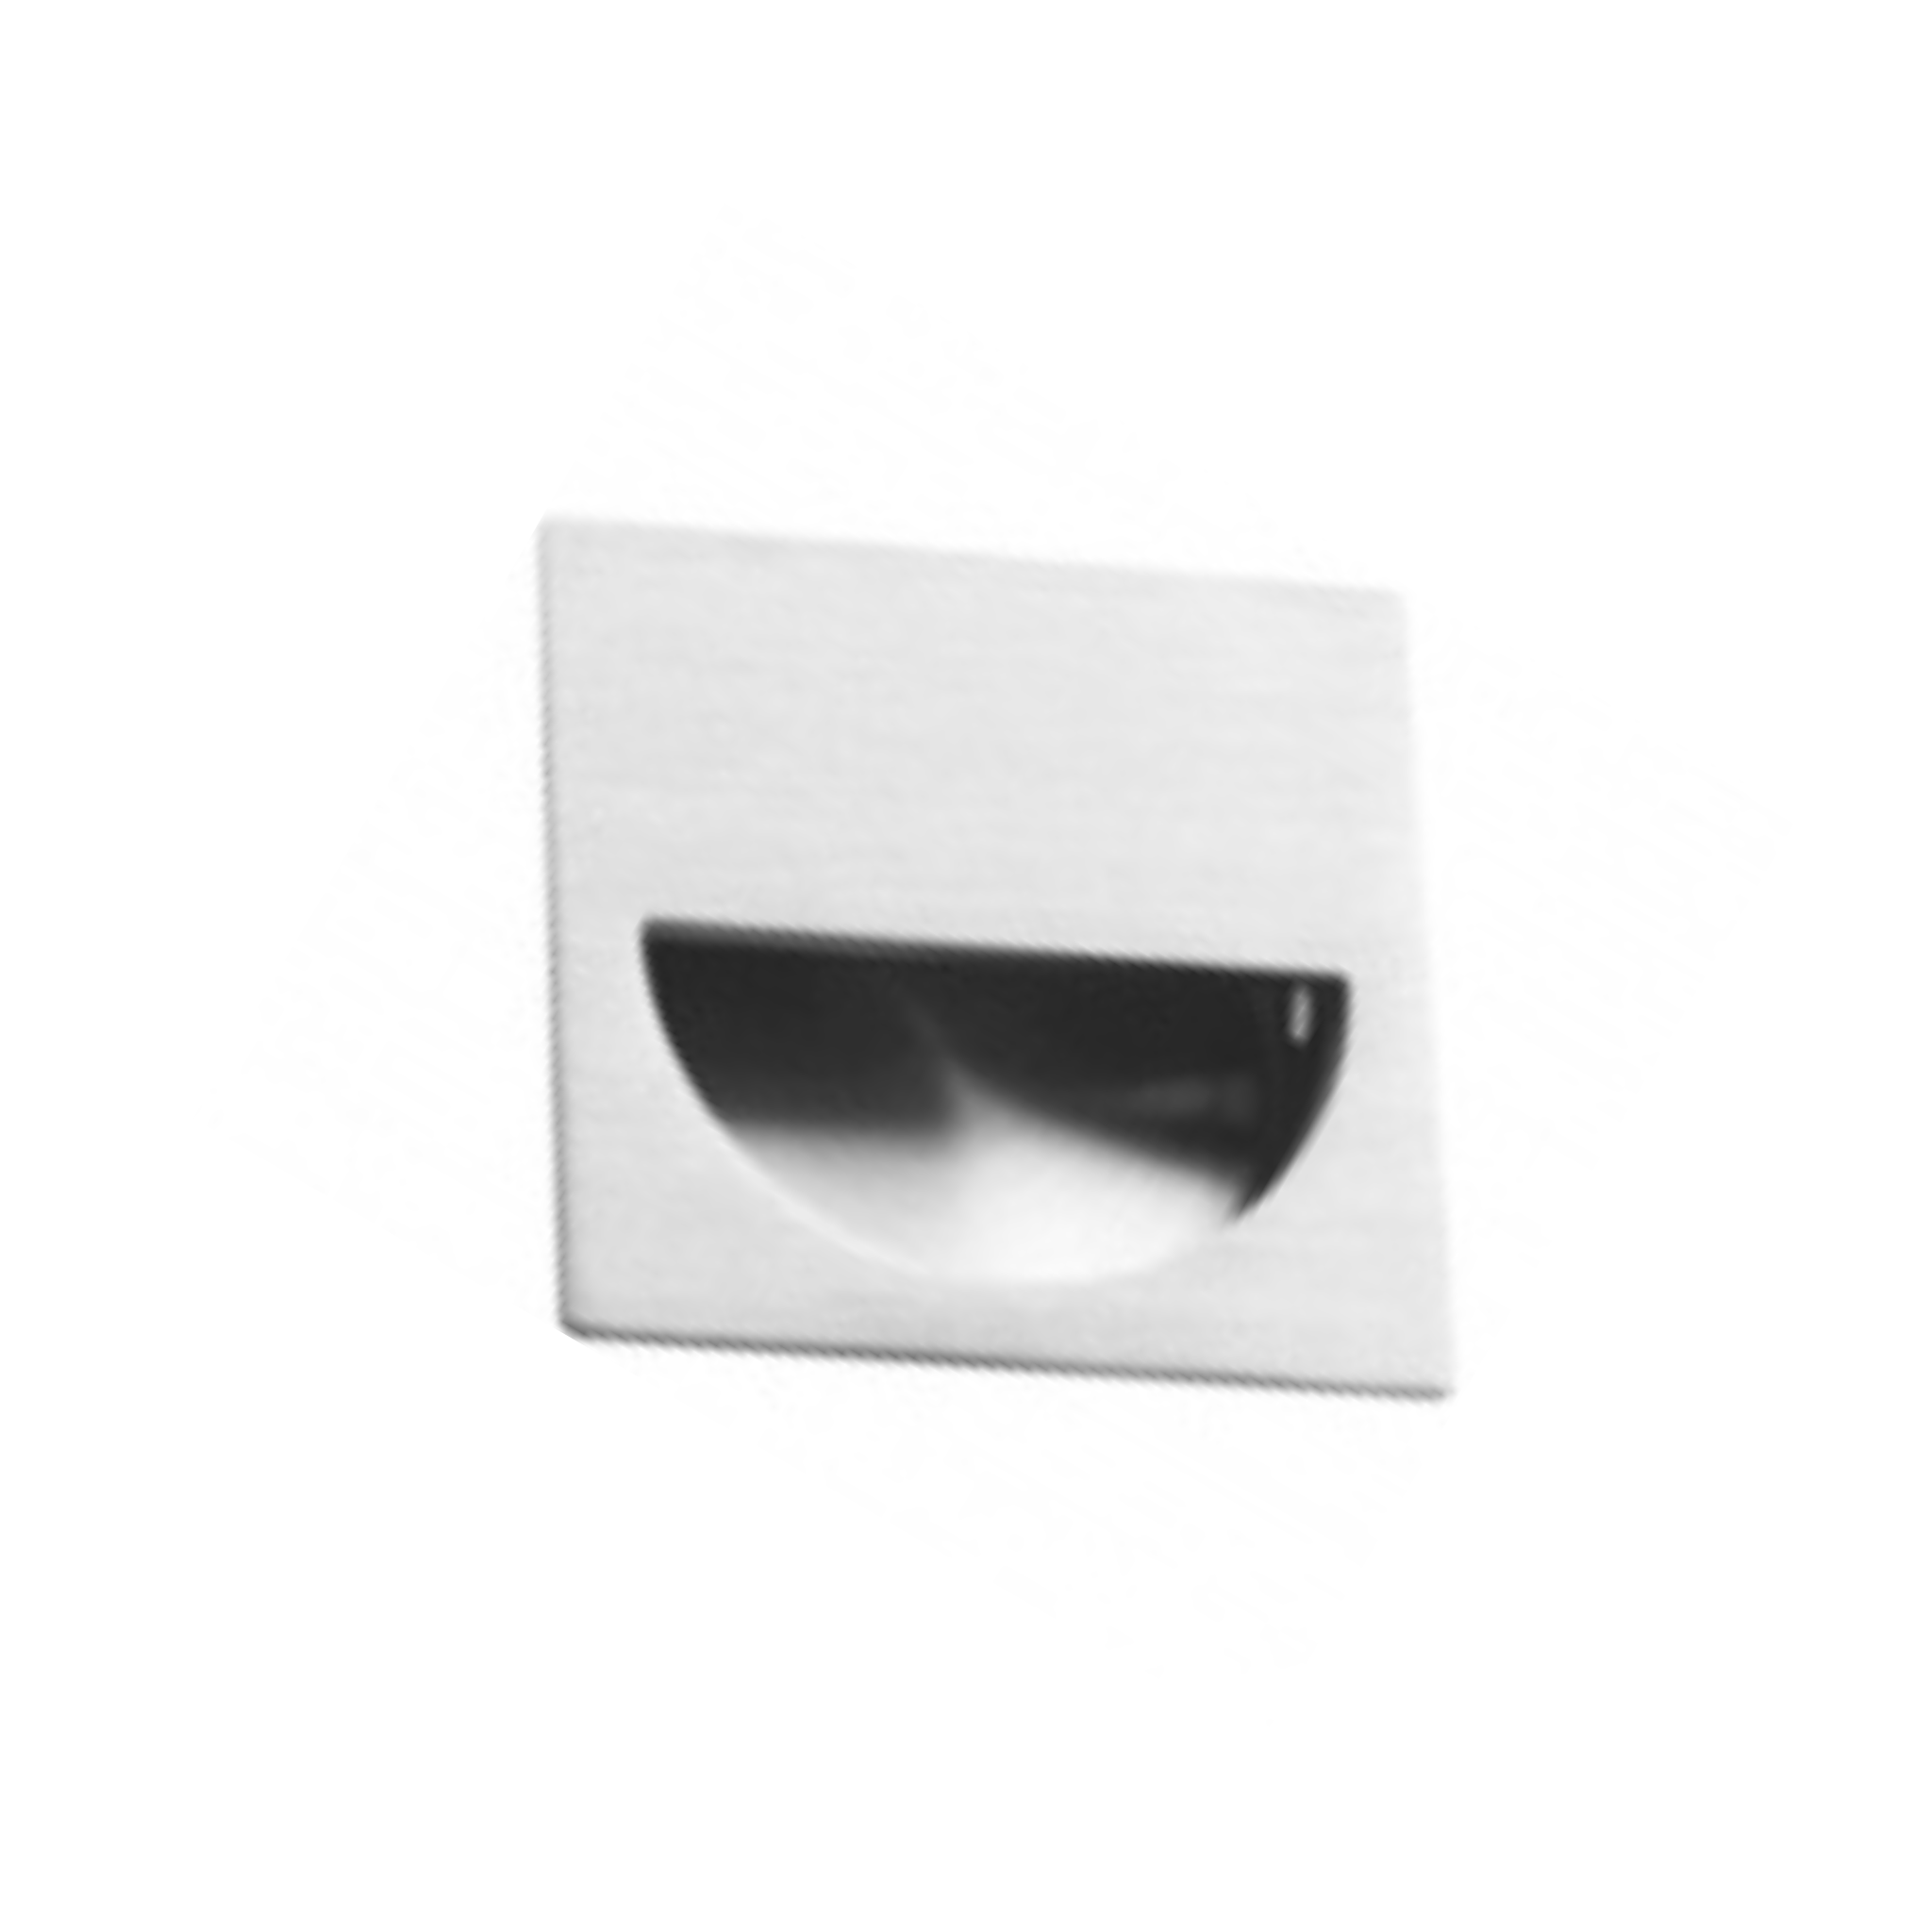 QS4454, Flush Pull, Square, 50mm (l) x 50mm (w), Stainless Steel, QS